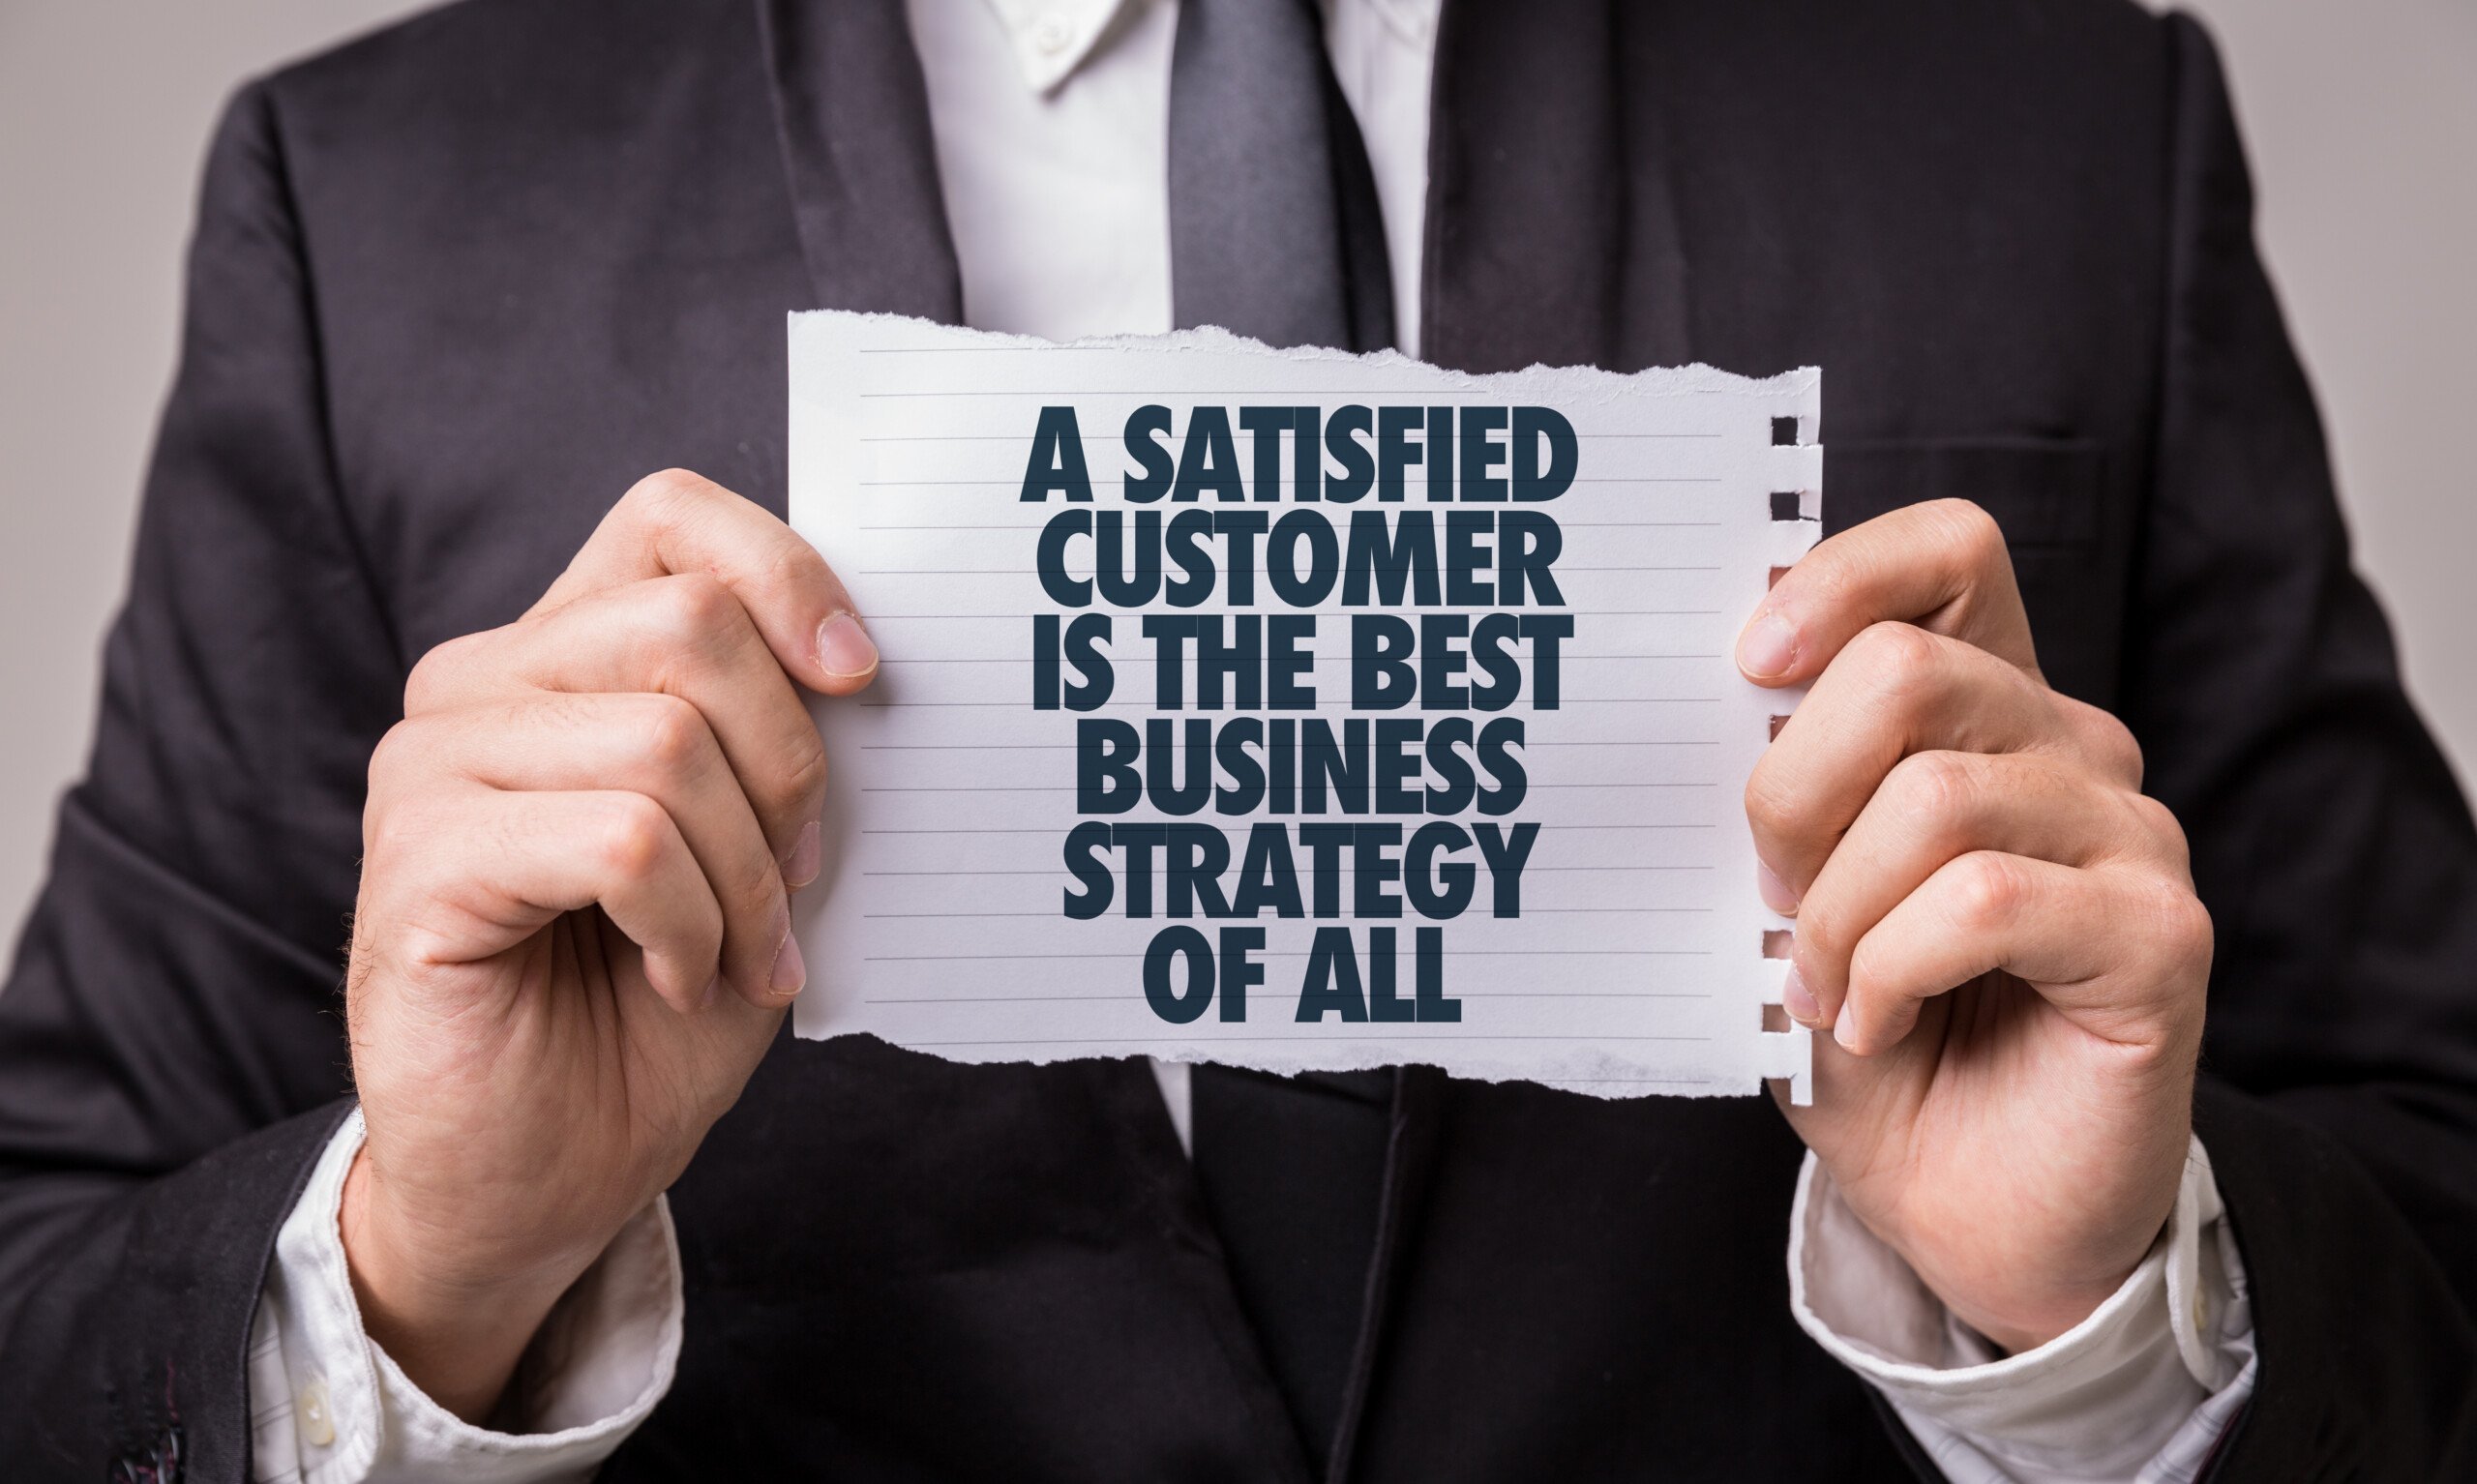 5 Tips for Overcoming Customer Service Obstacles as a Small Business